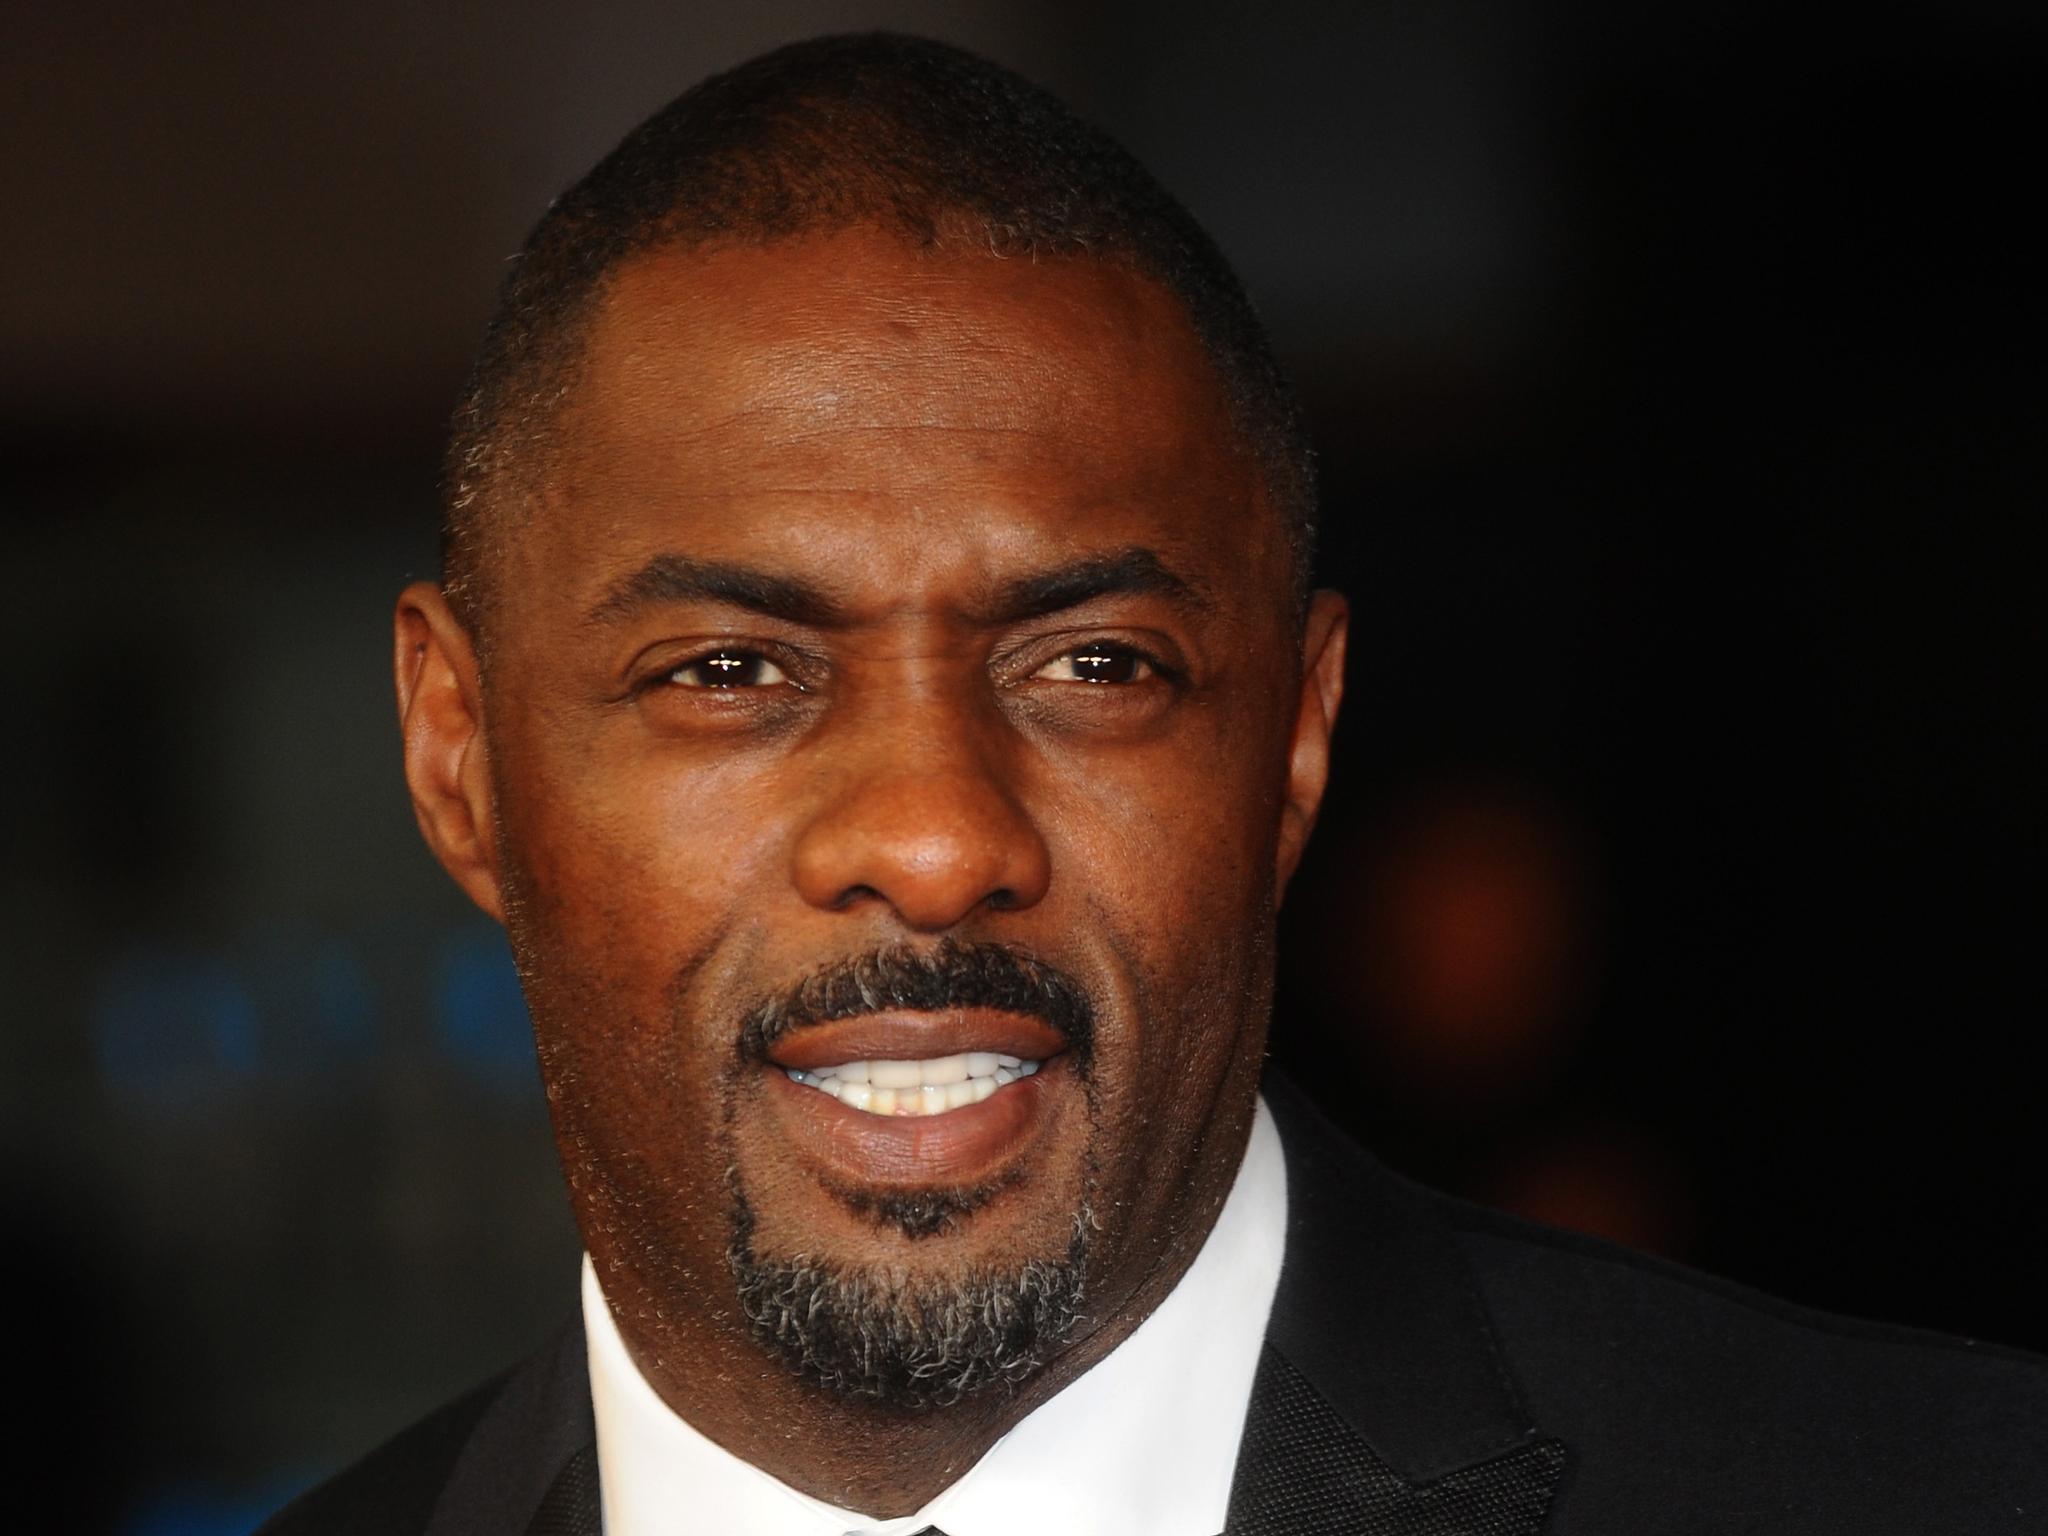 Idris Elba, who attributes his success to the help of the Prince's Trust, has backed the TV documentary